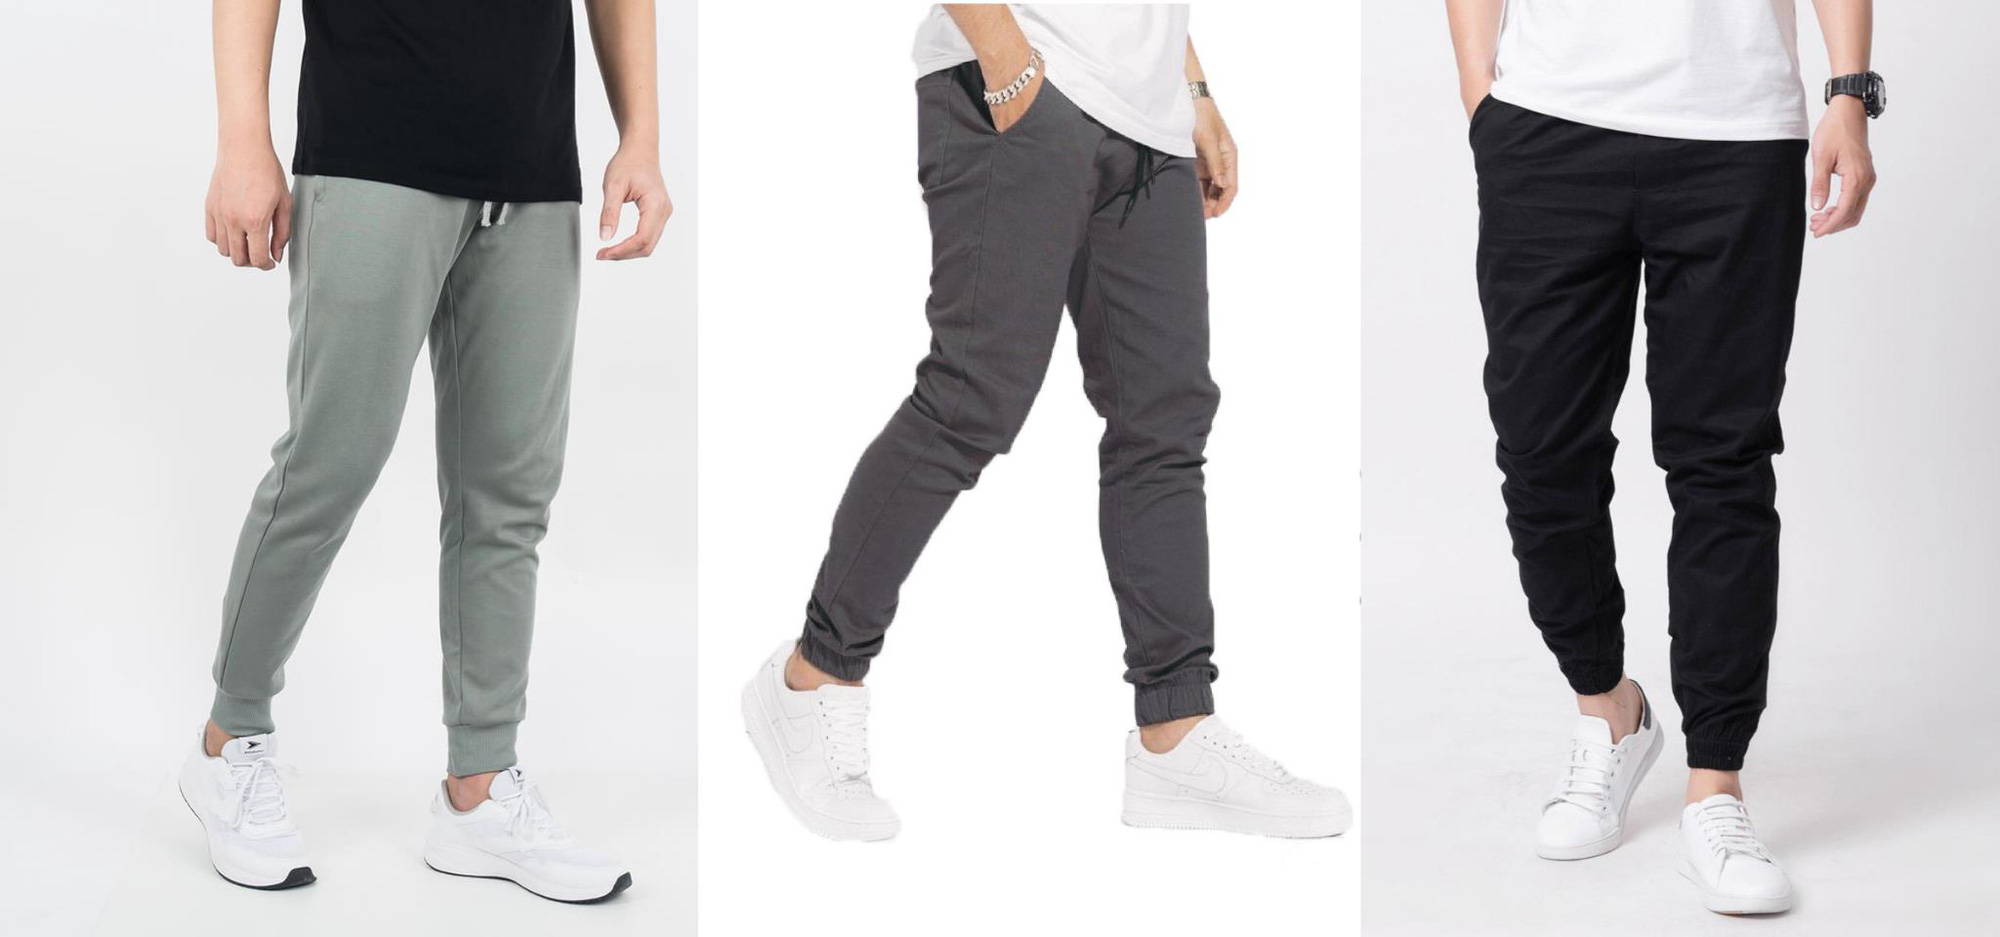 5 long-lasting fashion items for men in pursuit of a minimalist style from only 99K - Photo 2.